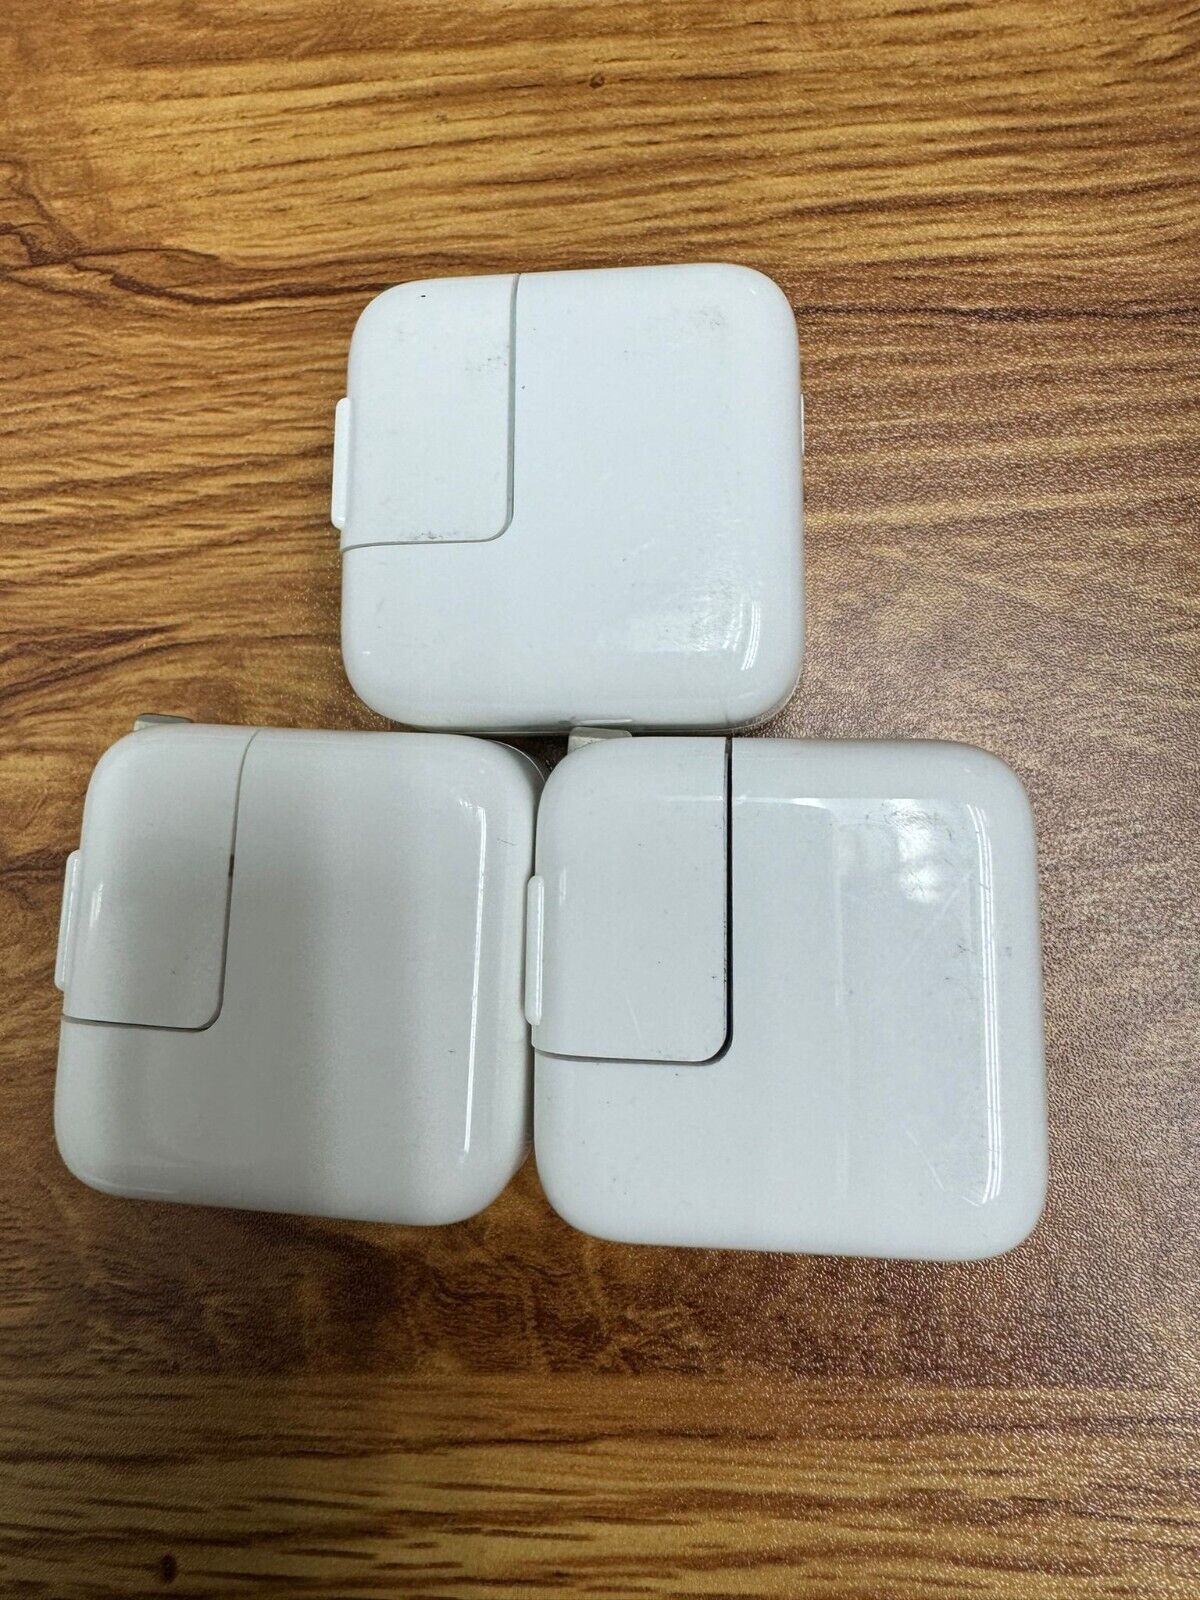 3 PACK Original Apple 12w USB Wall Charger Adapter OEM x3 charging cubes